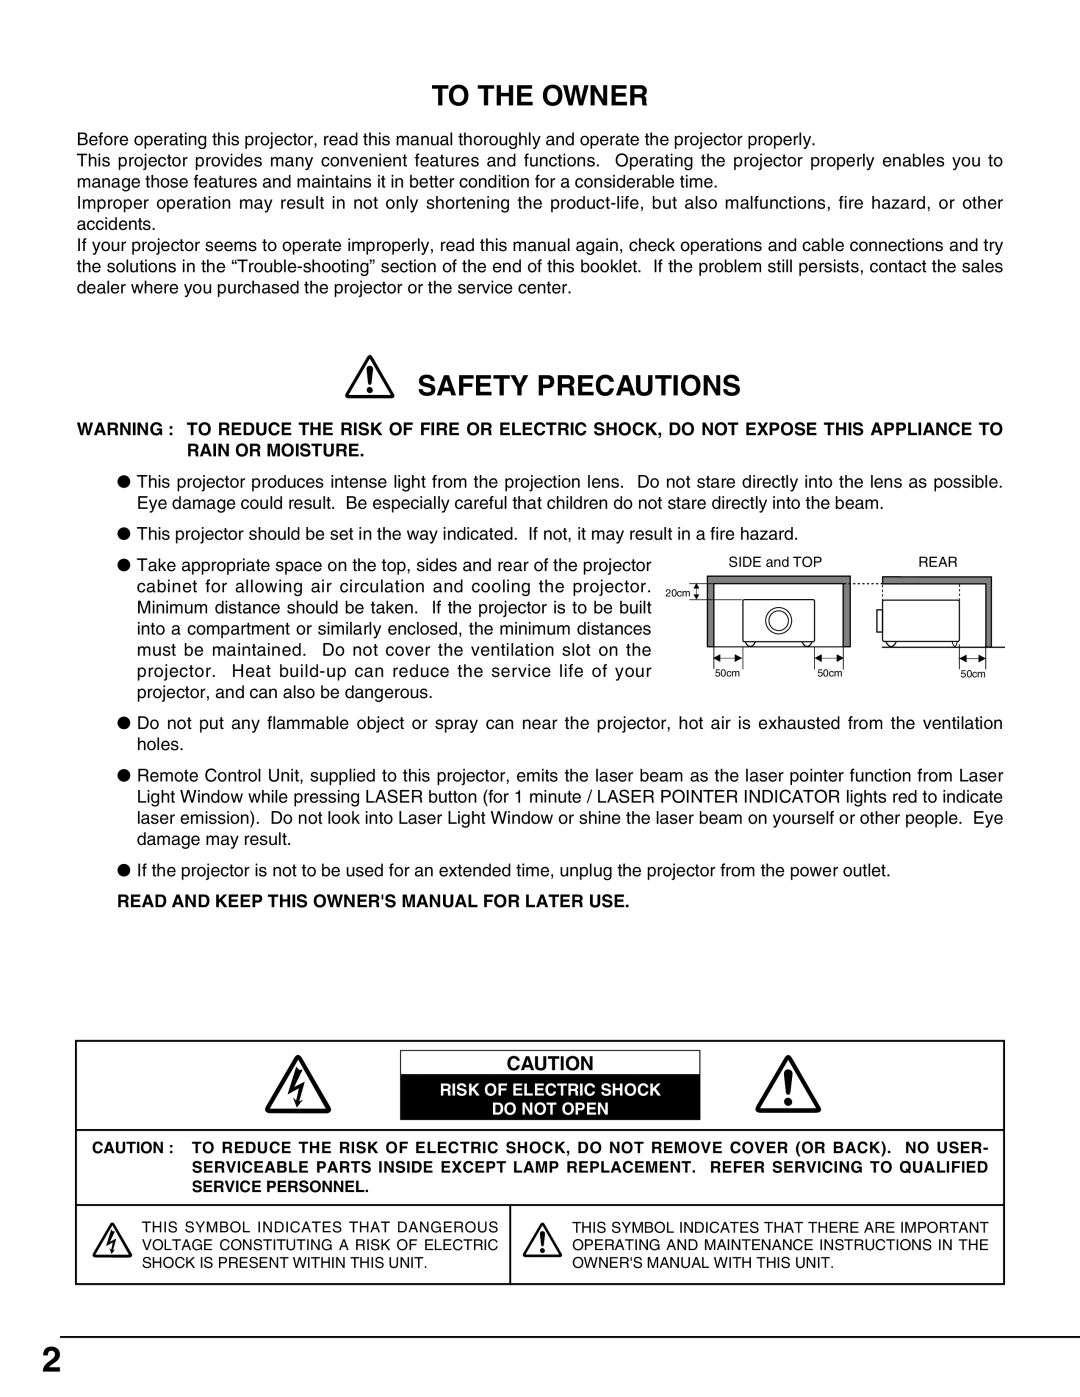 Eiki LC-X50 instruction manual To The Owner, Safety Precautions 